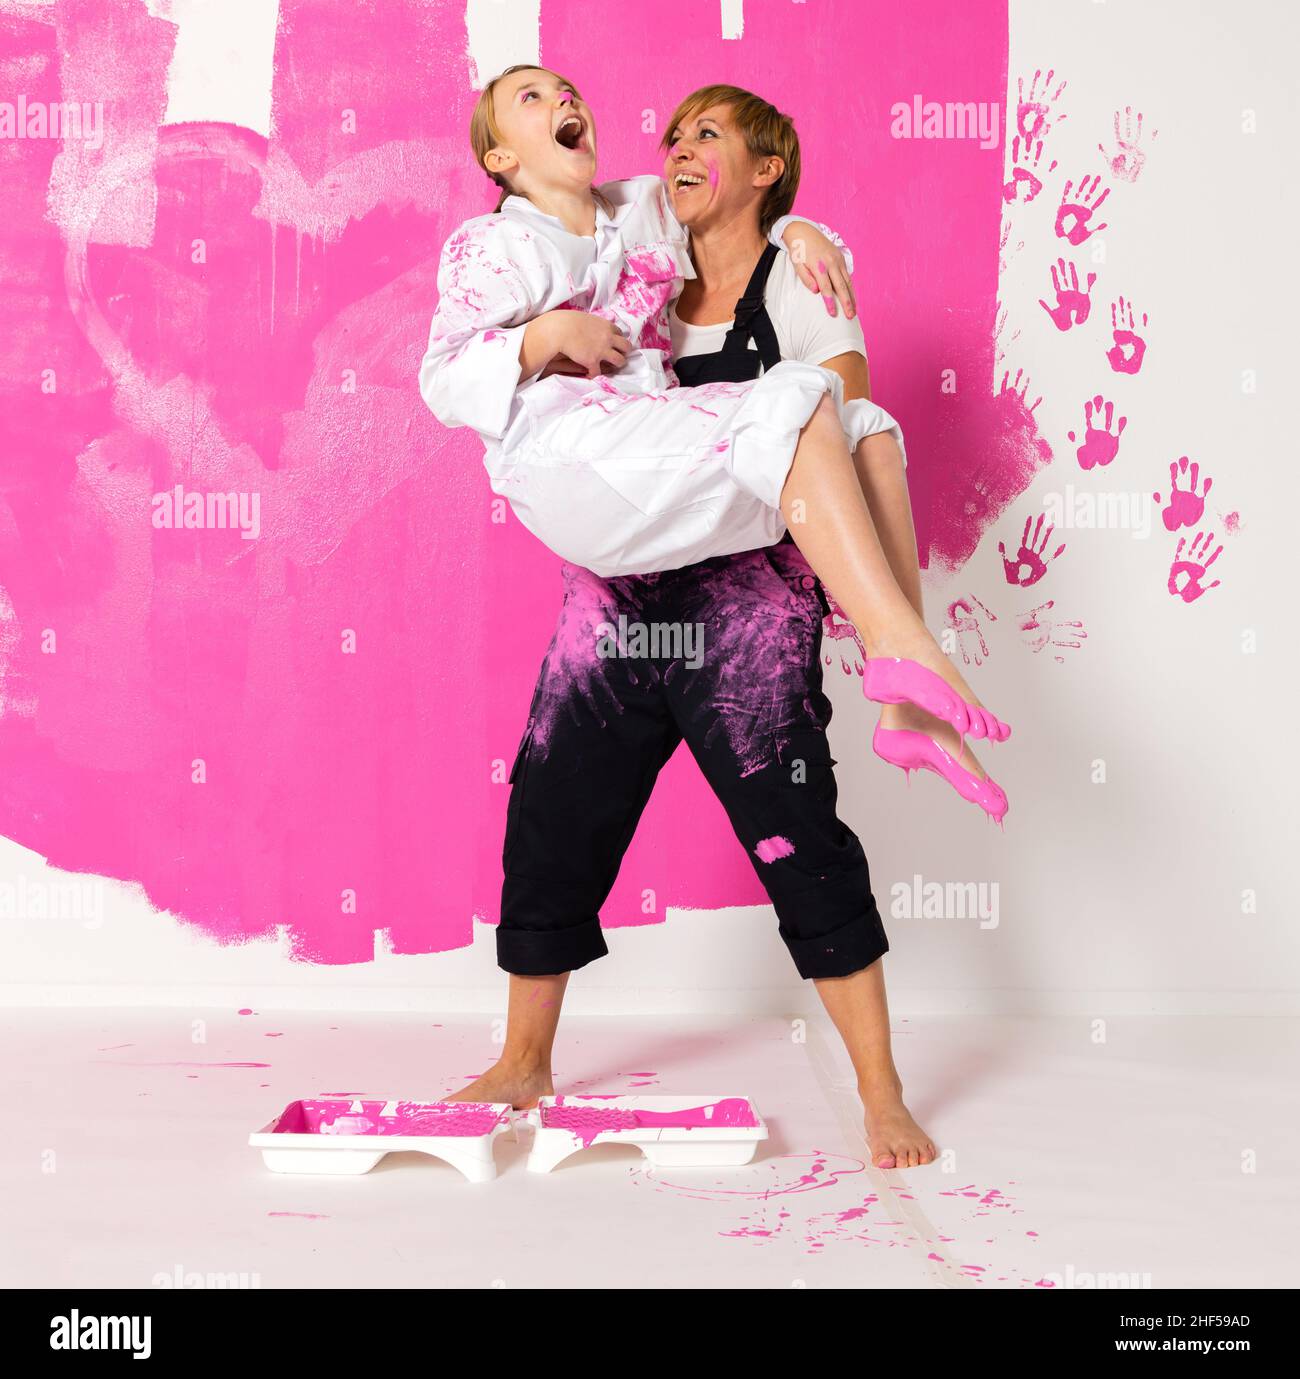 Mother and daughter standing in front of a wall painted with pink color.Mother is holding the girl and and the girl has color on both feet. Both are w Stock Photo